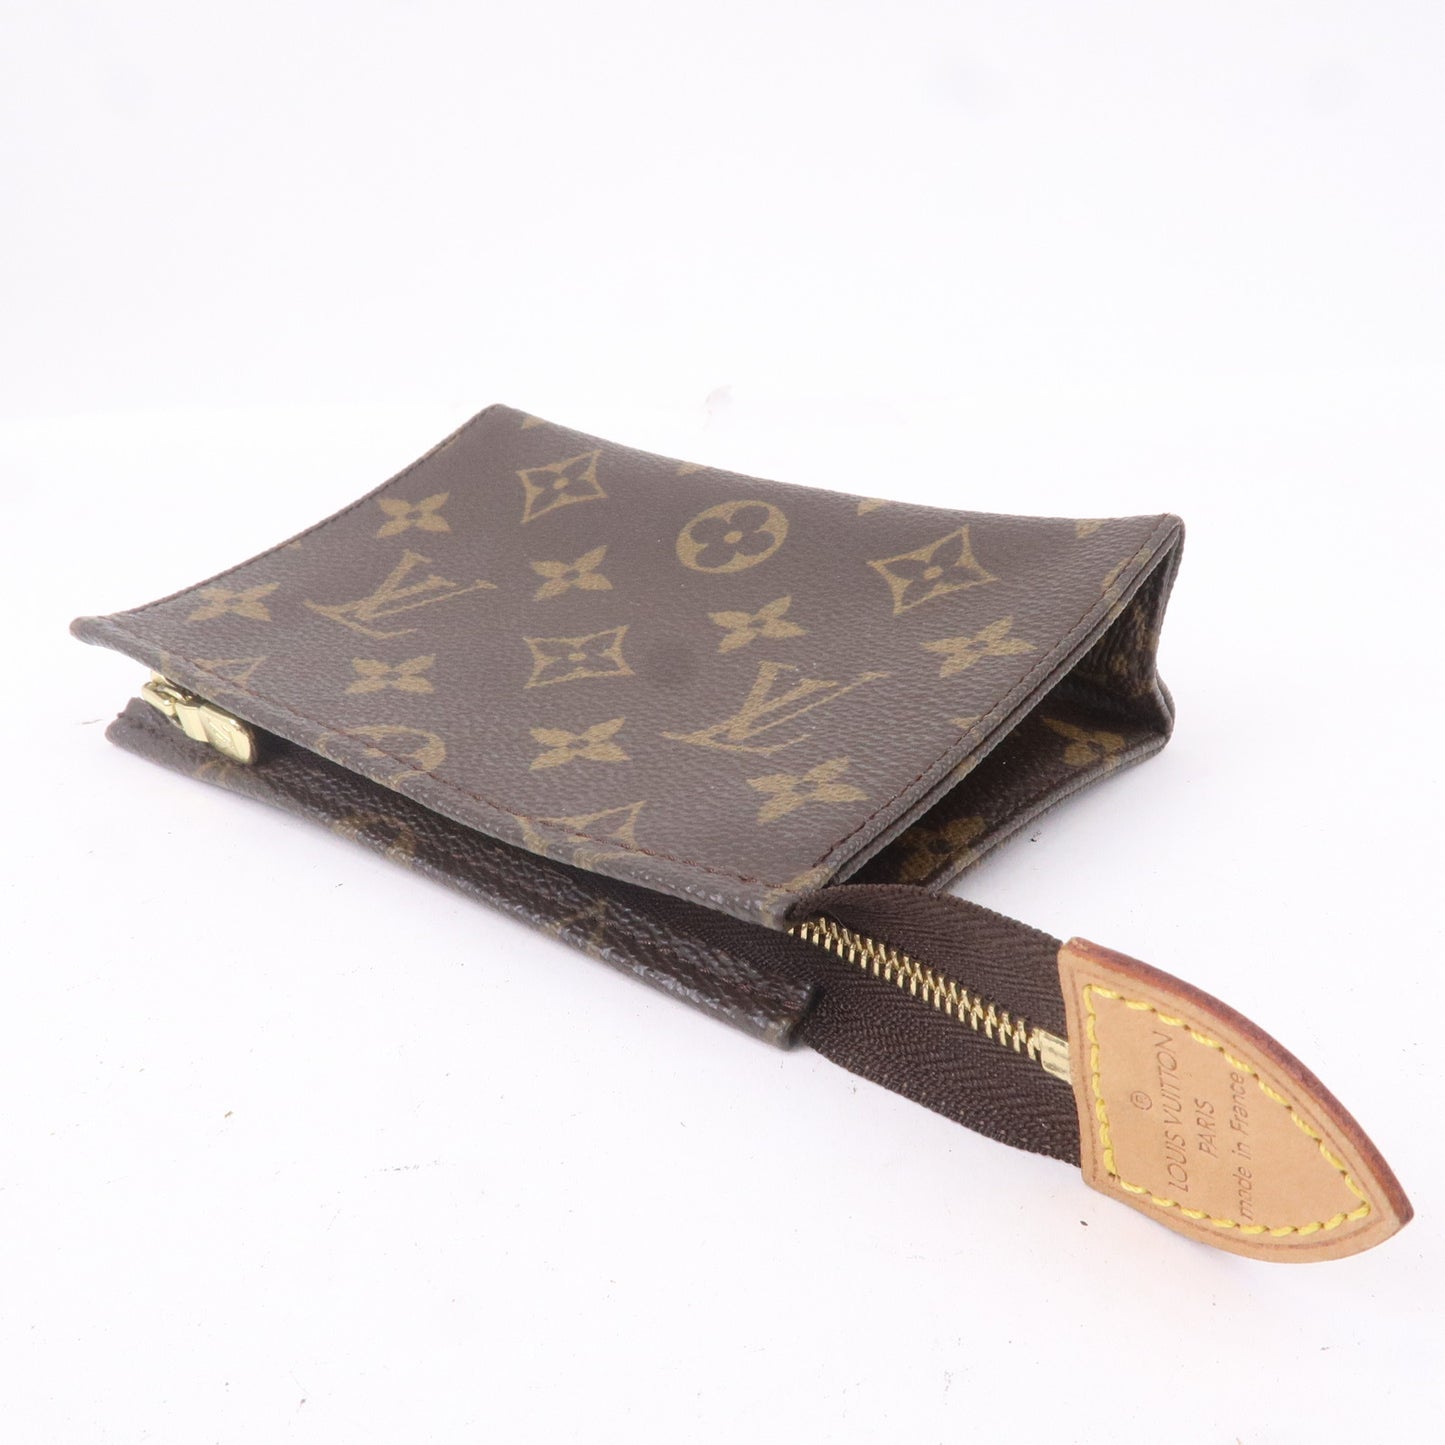 Lock & Key Shop - Louis Vuitton Toiletry Pouch 15, 19 and 26✨ Complete  inclusion with Store Receipt From Europe! 🇮🇹 BDO 💶💰 Whatsapp/Viber  📲+39 327 9850335 DISCLAIMER: Lock&Key is not affiliate